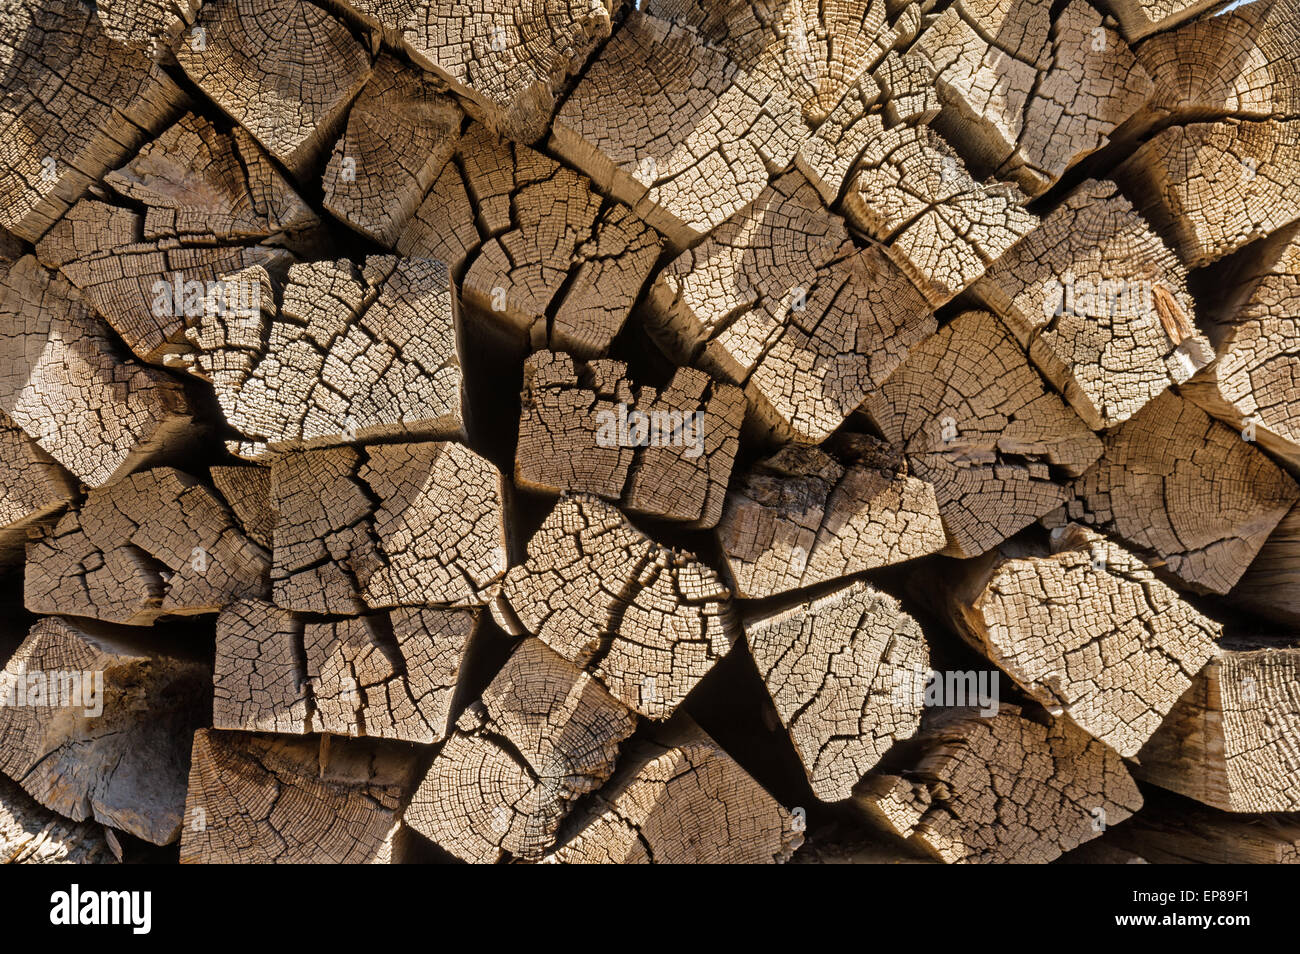 background of old wood railroad ties piled up Stock Photo